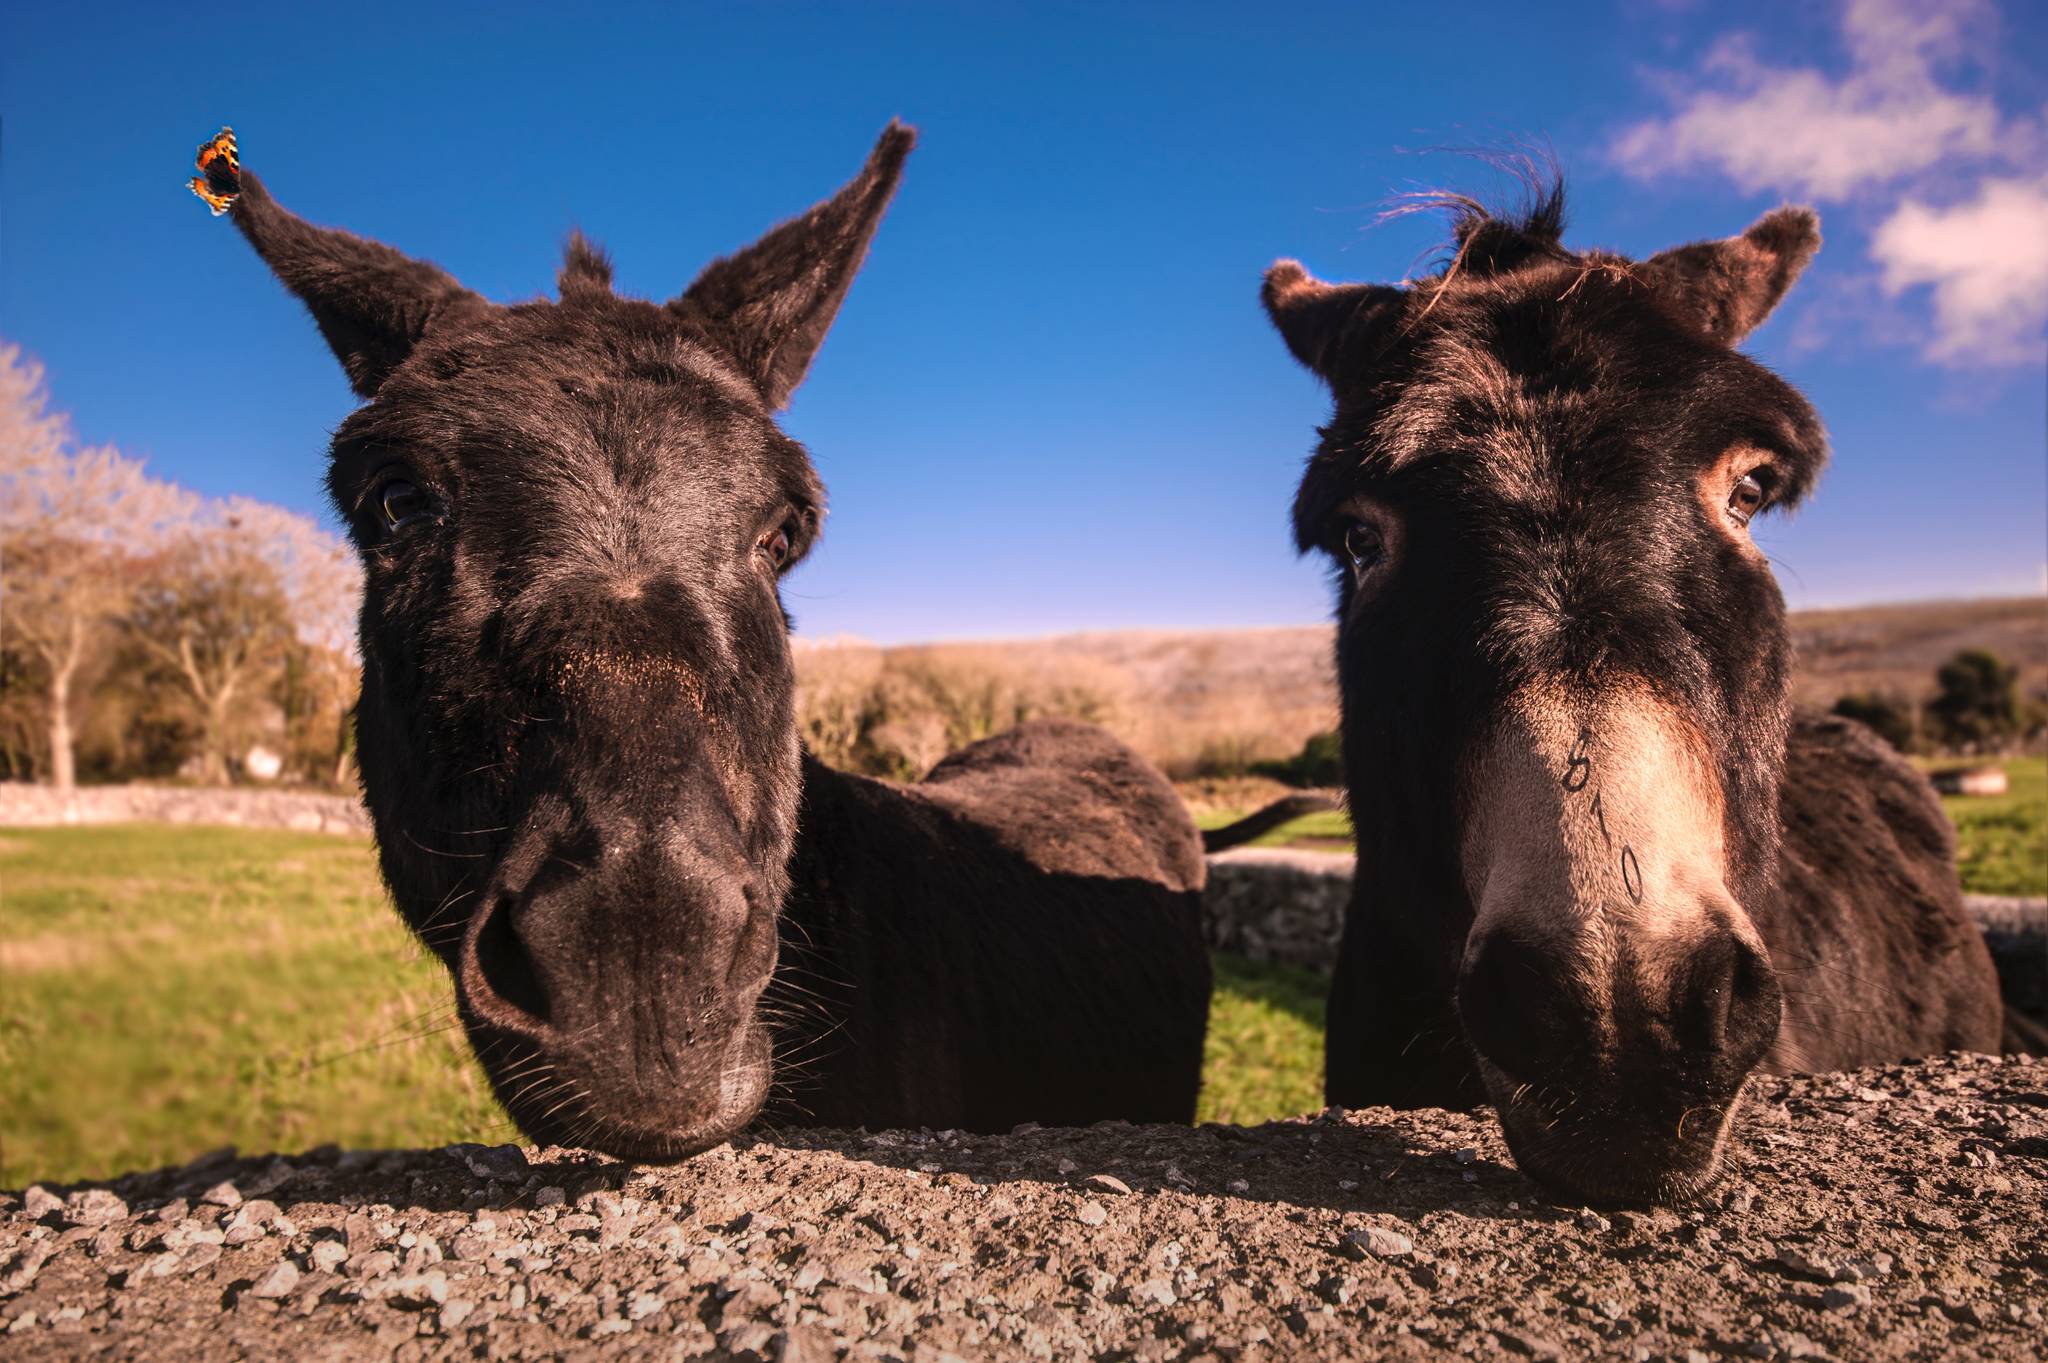 Living & Growing: The Derech of the Donkey